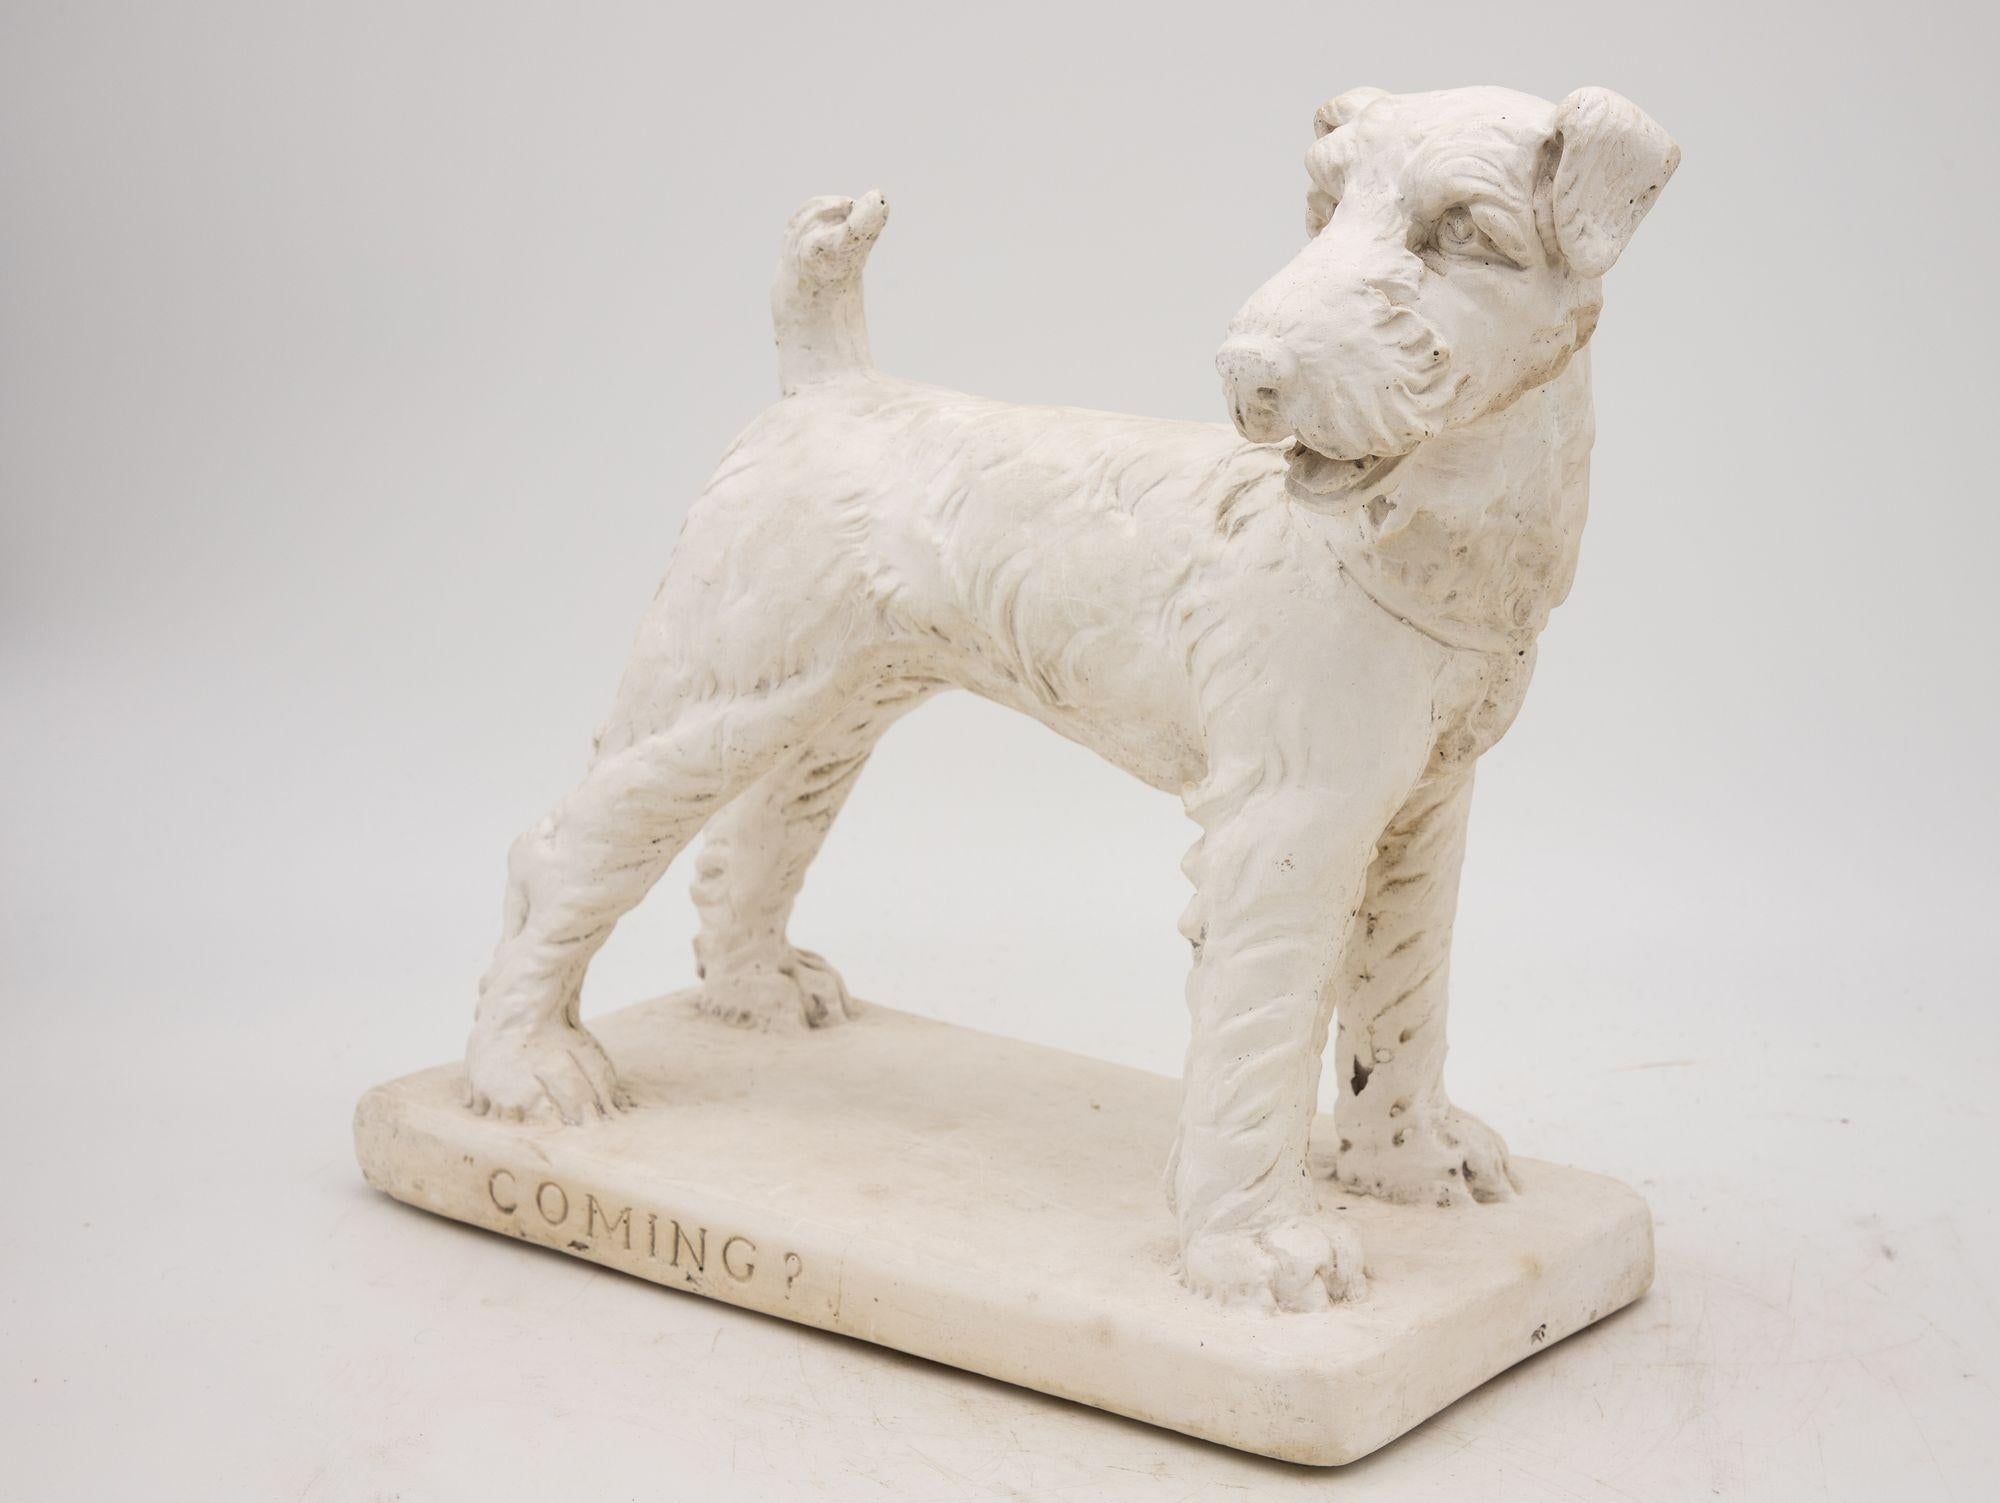 A delightful relic of the 20th century, this plaster terrier dog model exudes timeless charm. With intricate attention to detail, the terrier's lifelike features are masterfully captured, showcasing the artistry of its era. Perched upon a base that